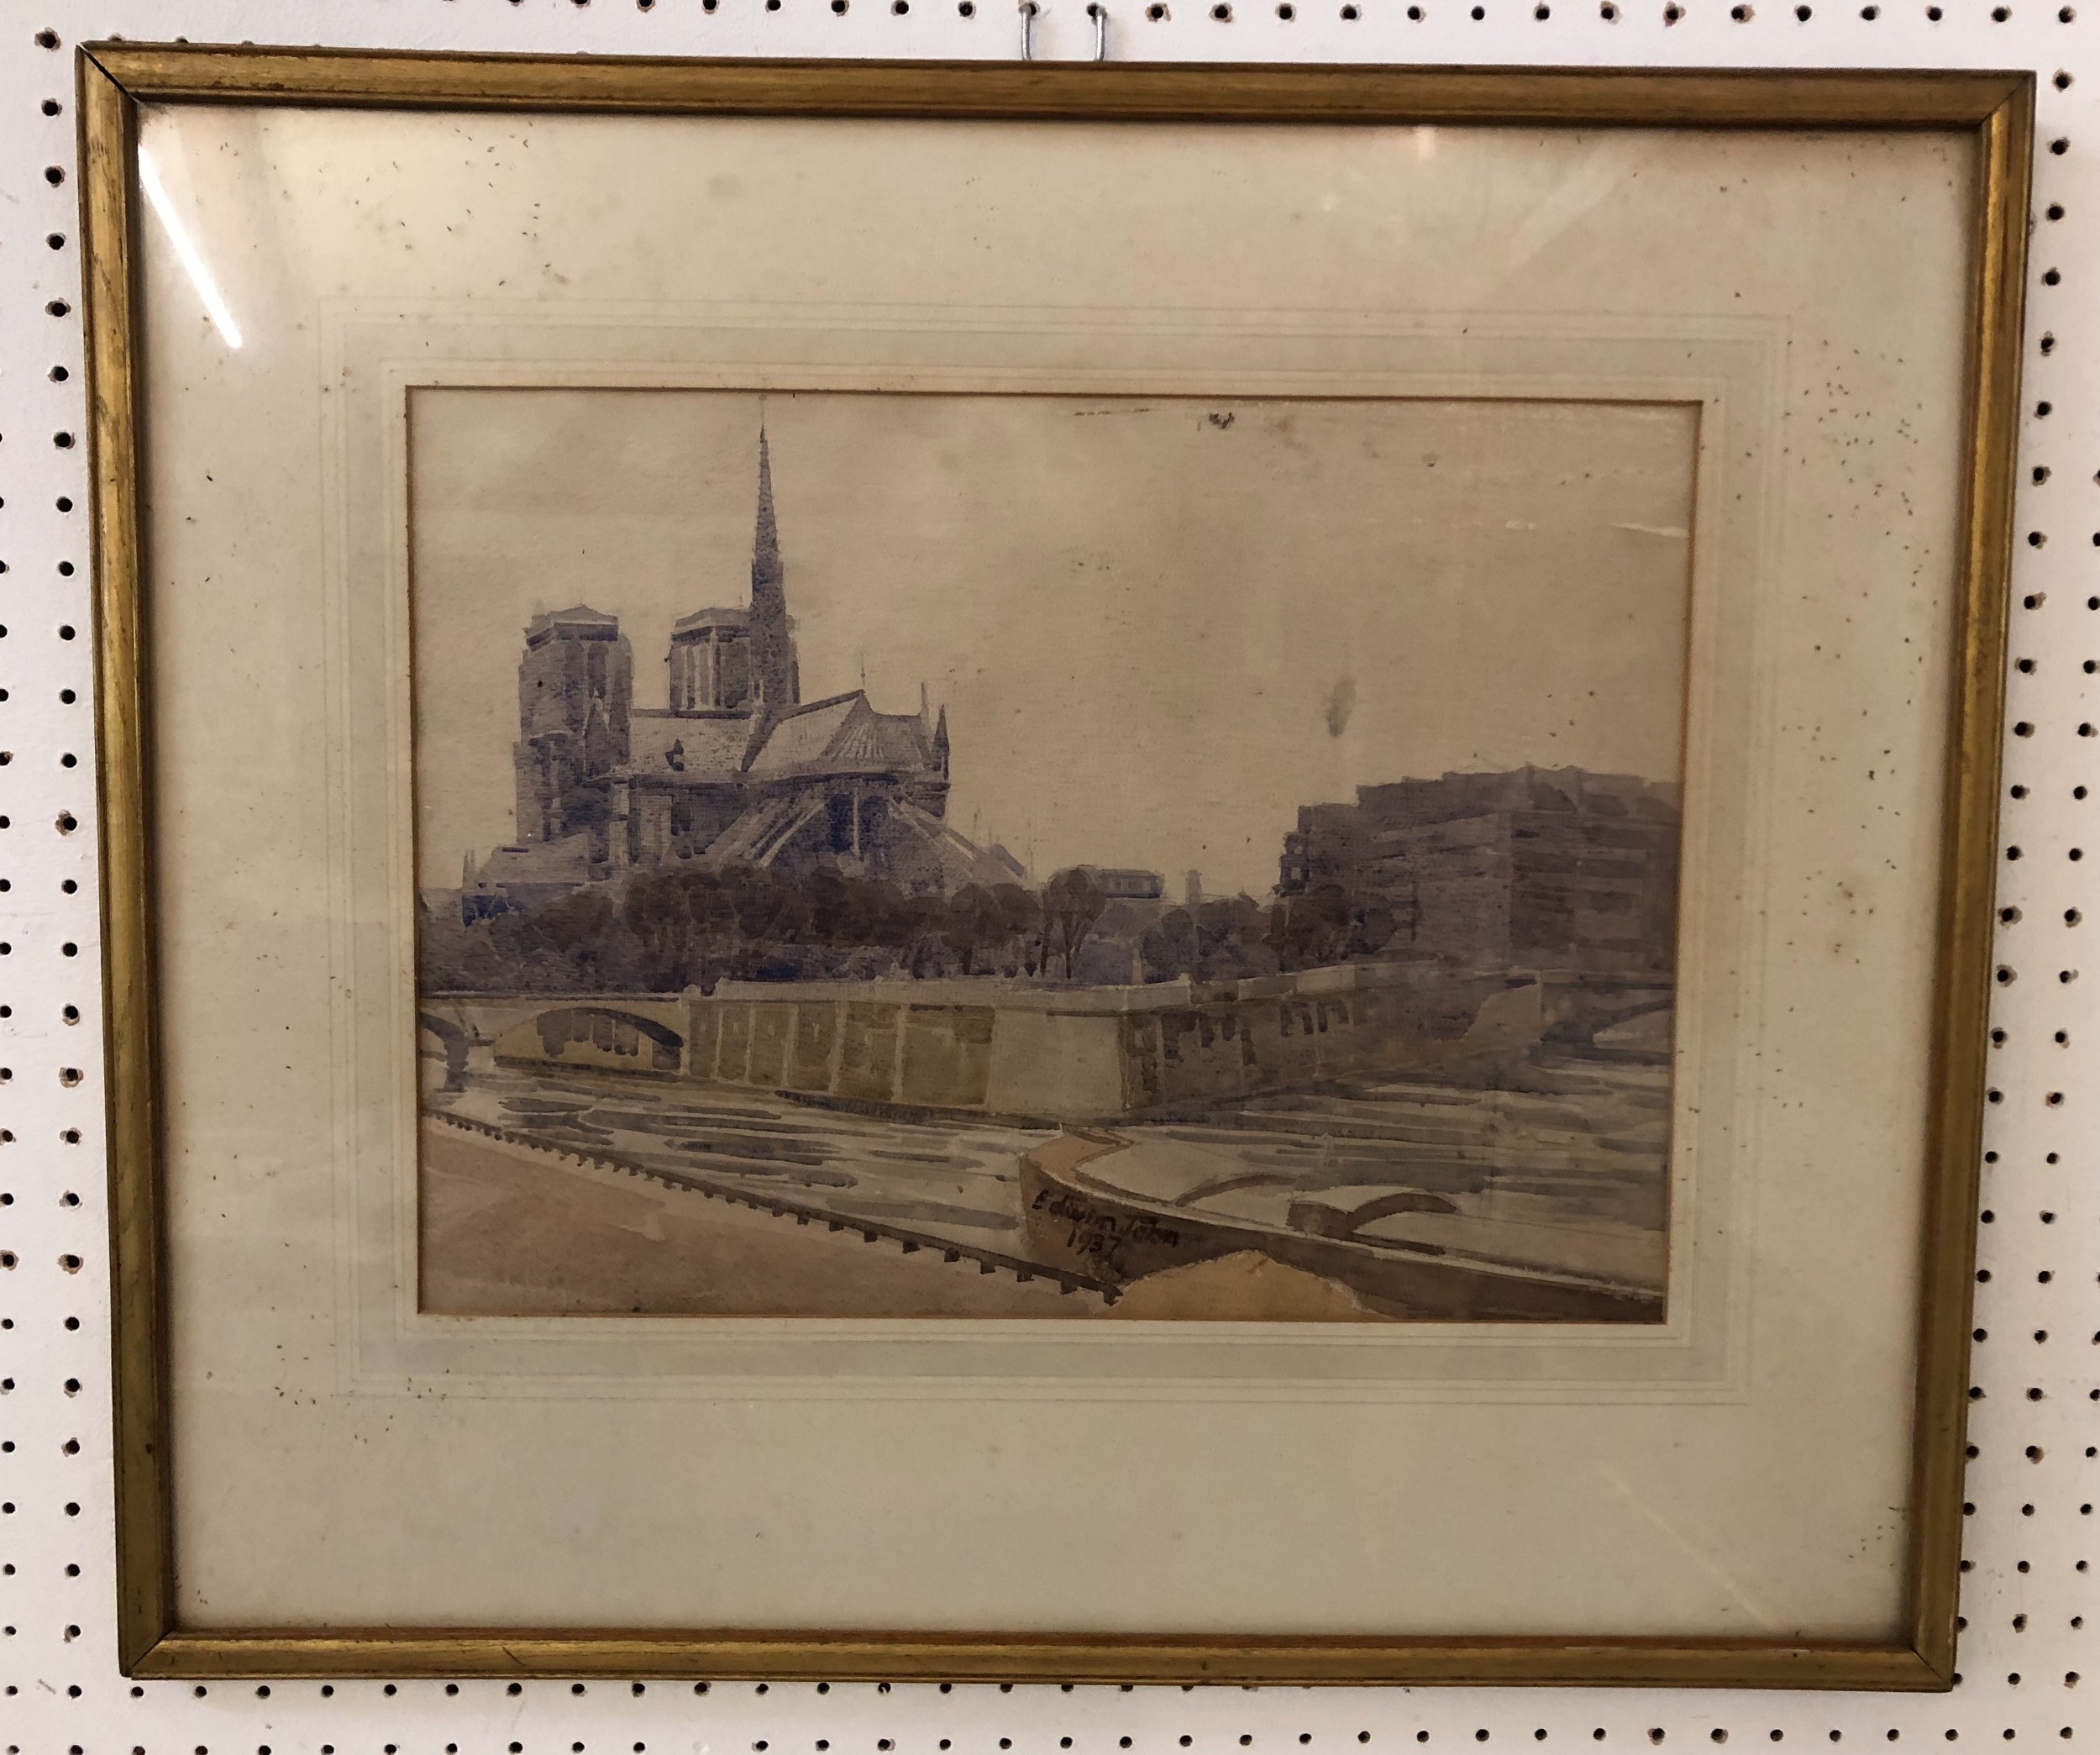 Edwin John (1905-1978) - 'Notre Dame, Paris' (1937), signed and dated below with title inscribed